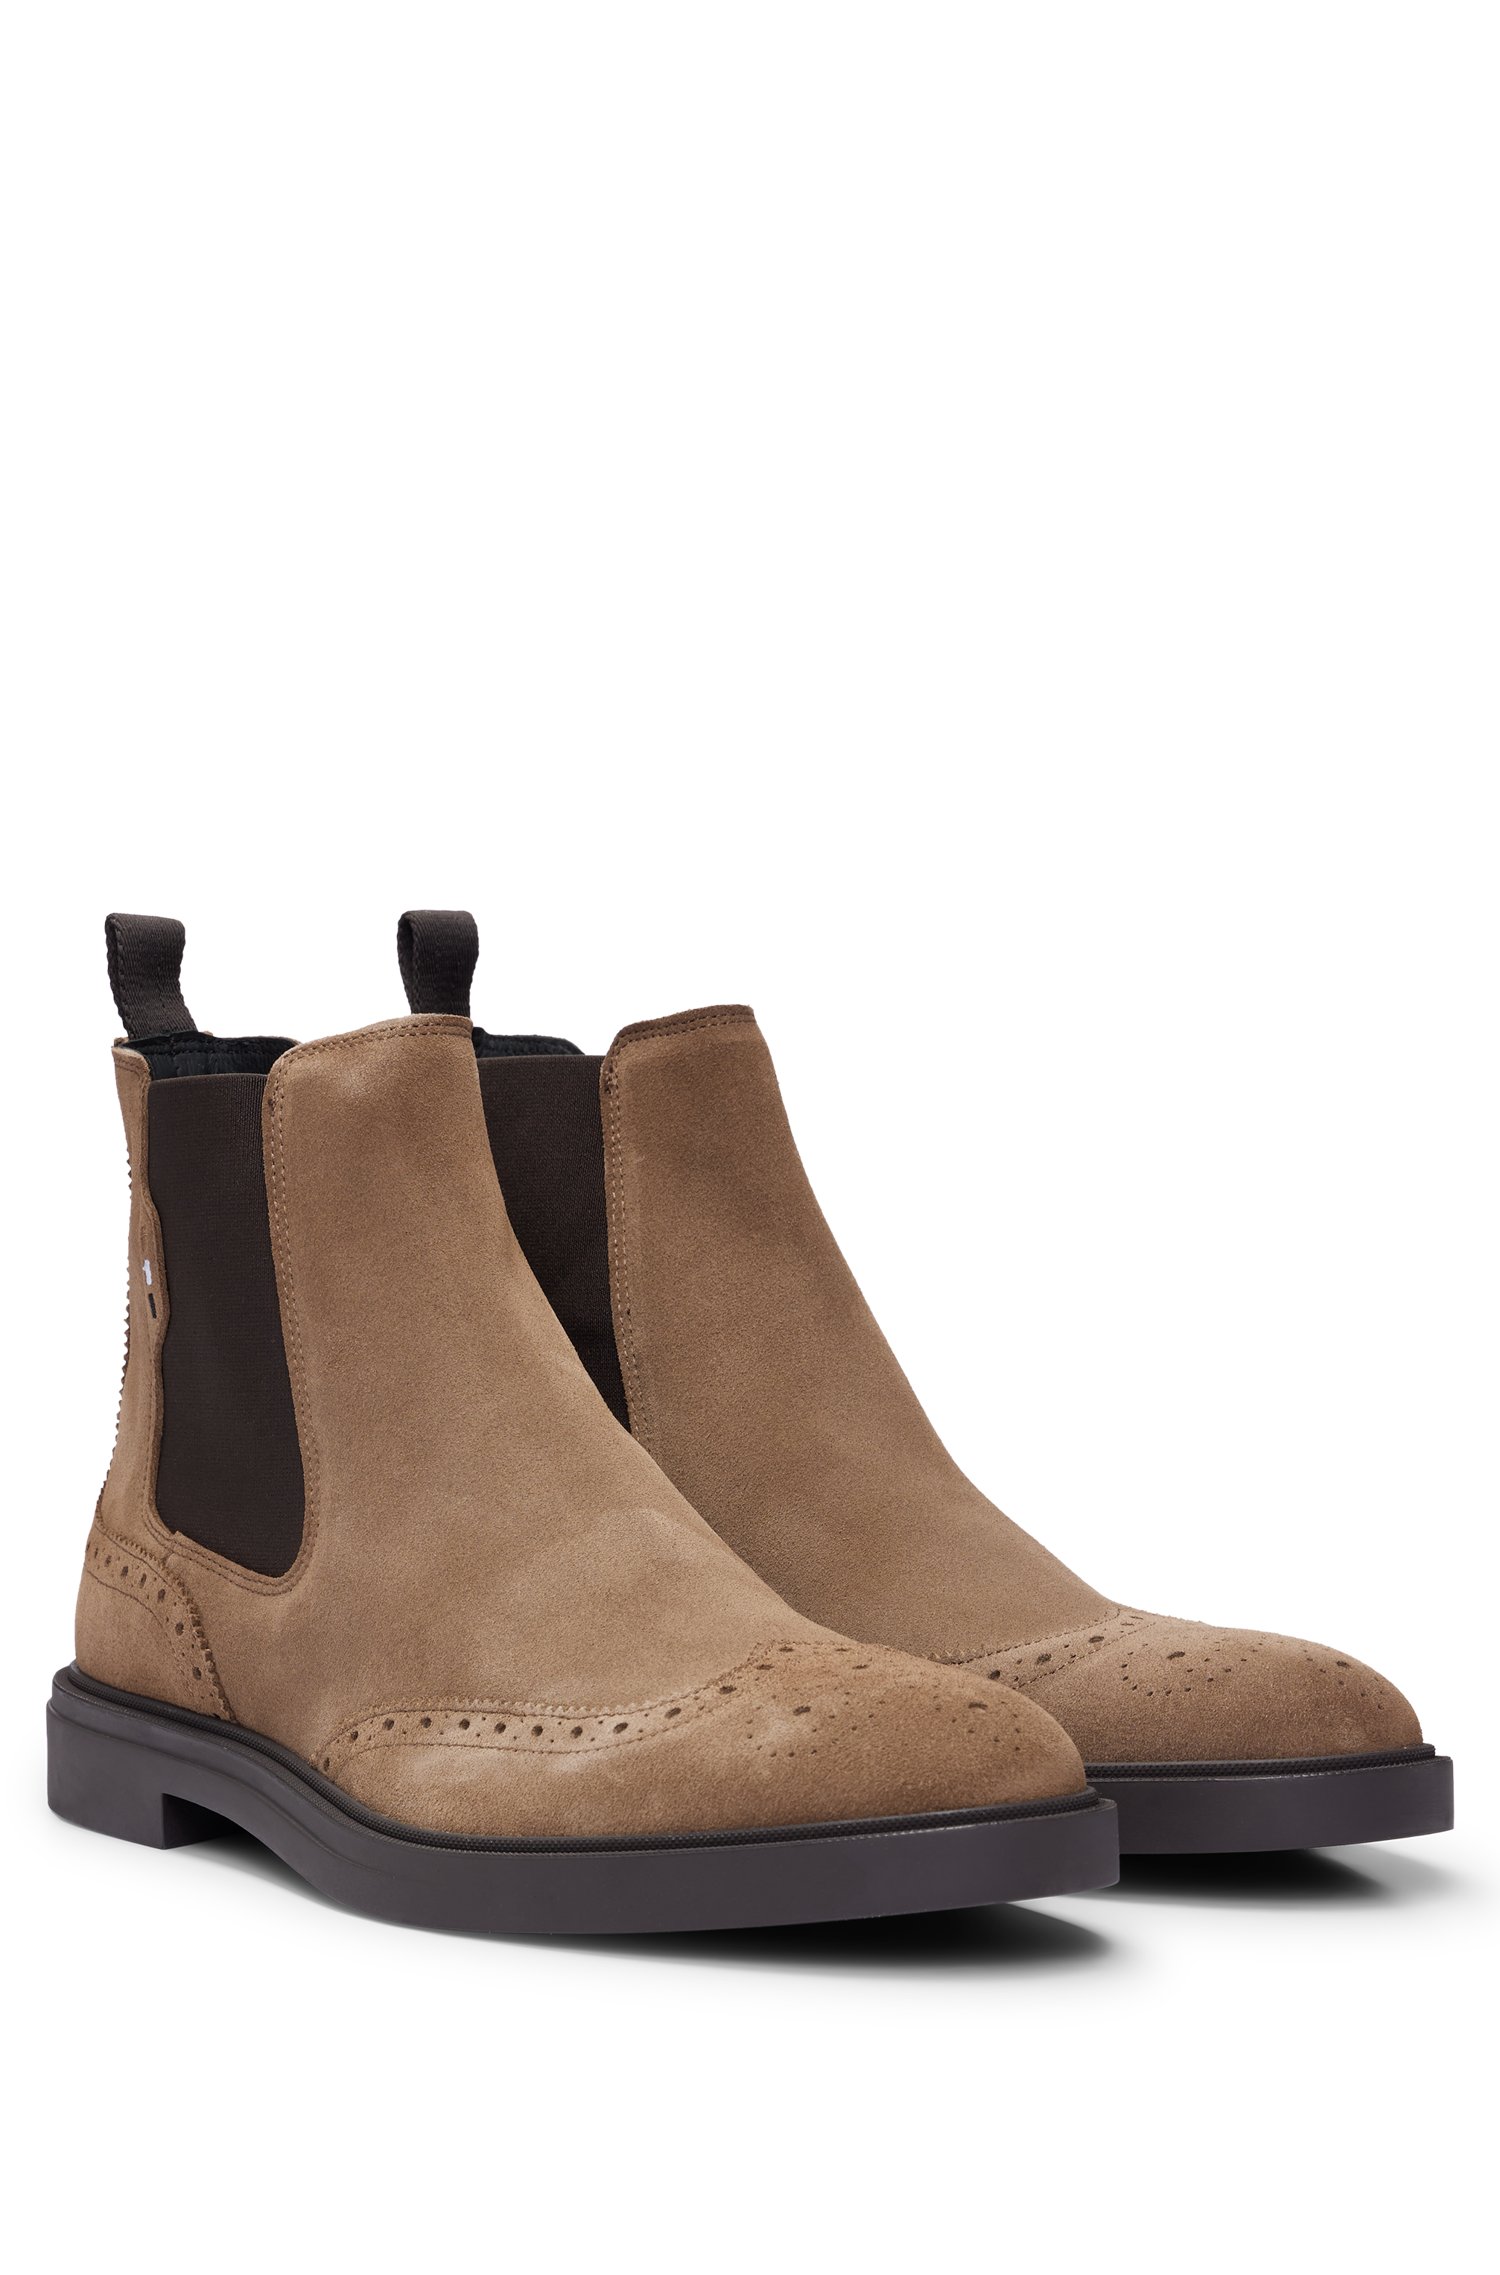 Suede Chelsea boots with brogue details